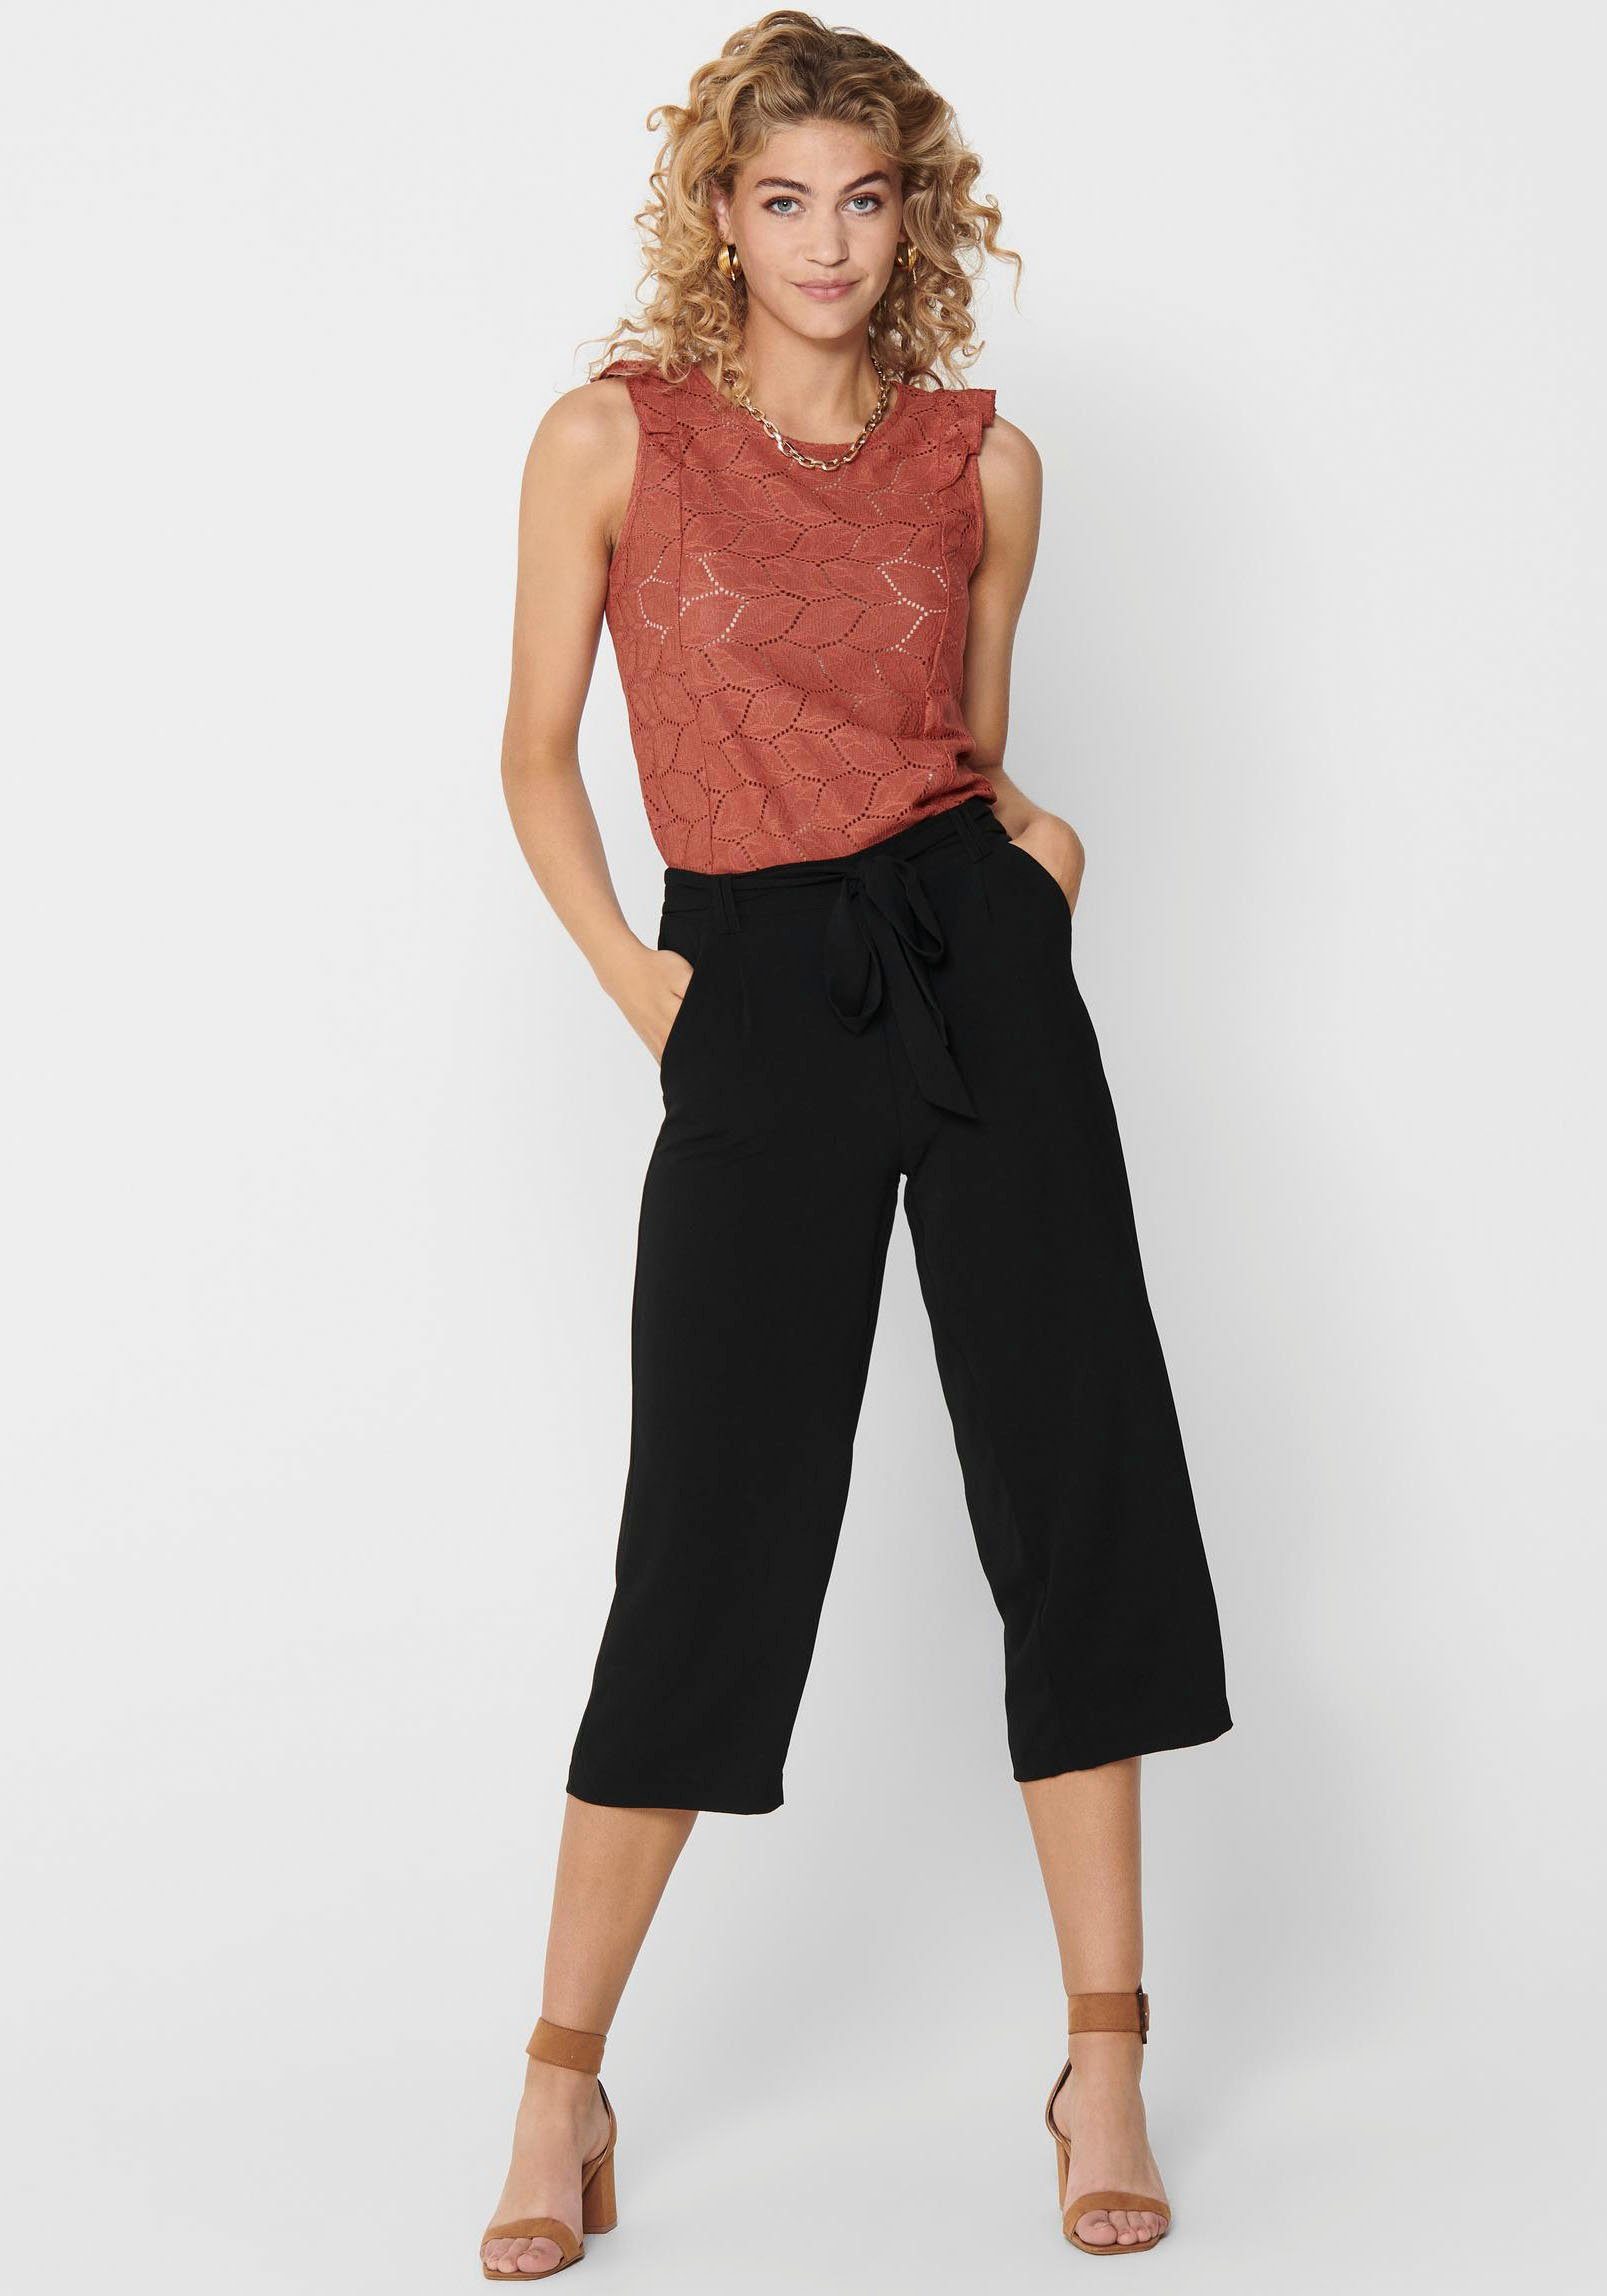 in ONLWINNER NOOS oder Design gestreiftem uni CULOTTE Black PTM PALAZZO PANT ONLY Palazzohose